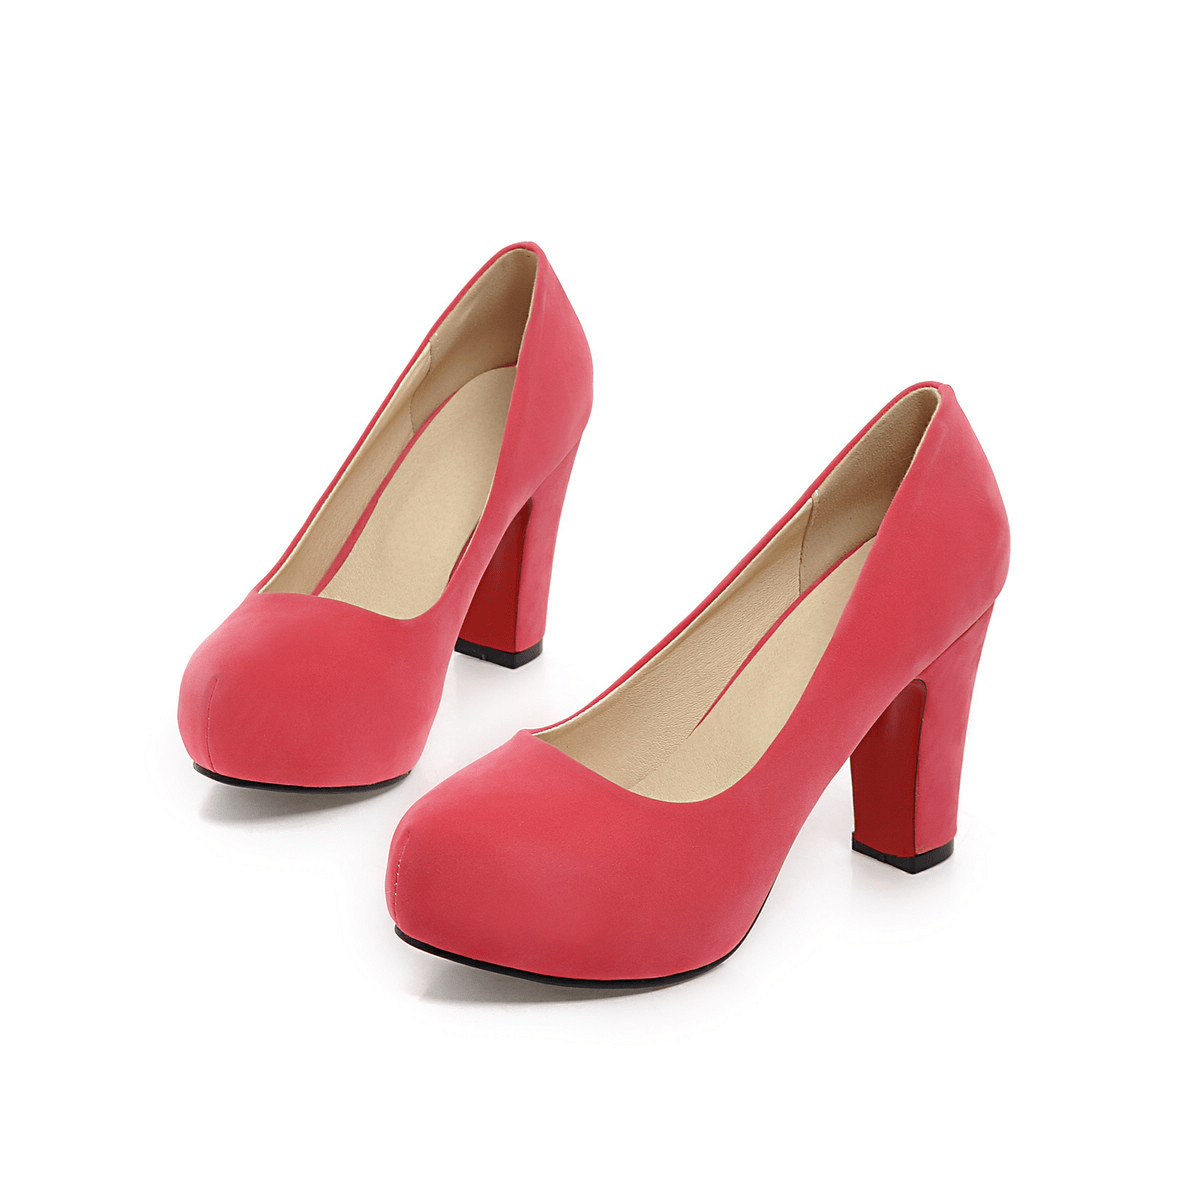 Suede Pumps with Shallow Mouth, Thick Heel, Water Platform, Super High Heel